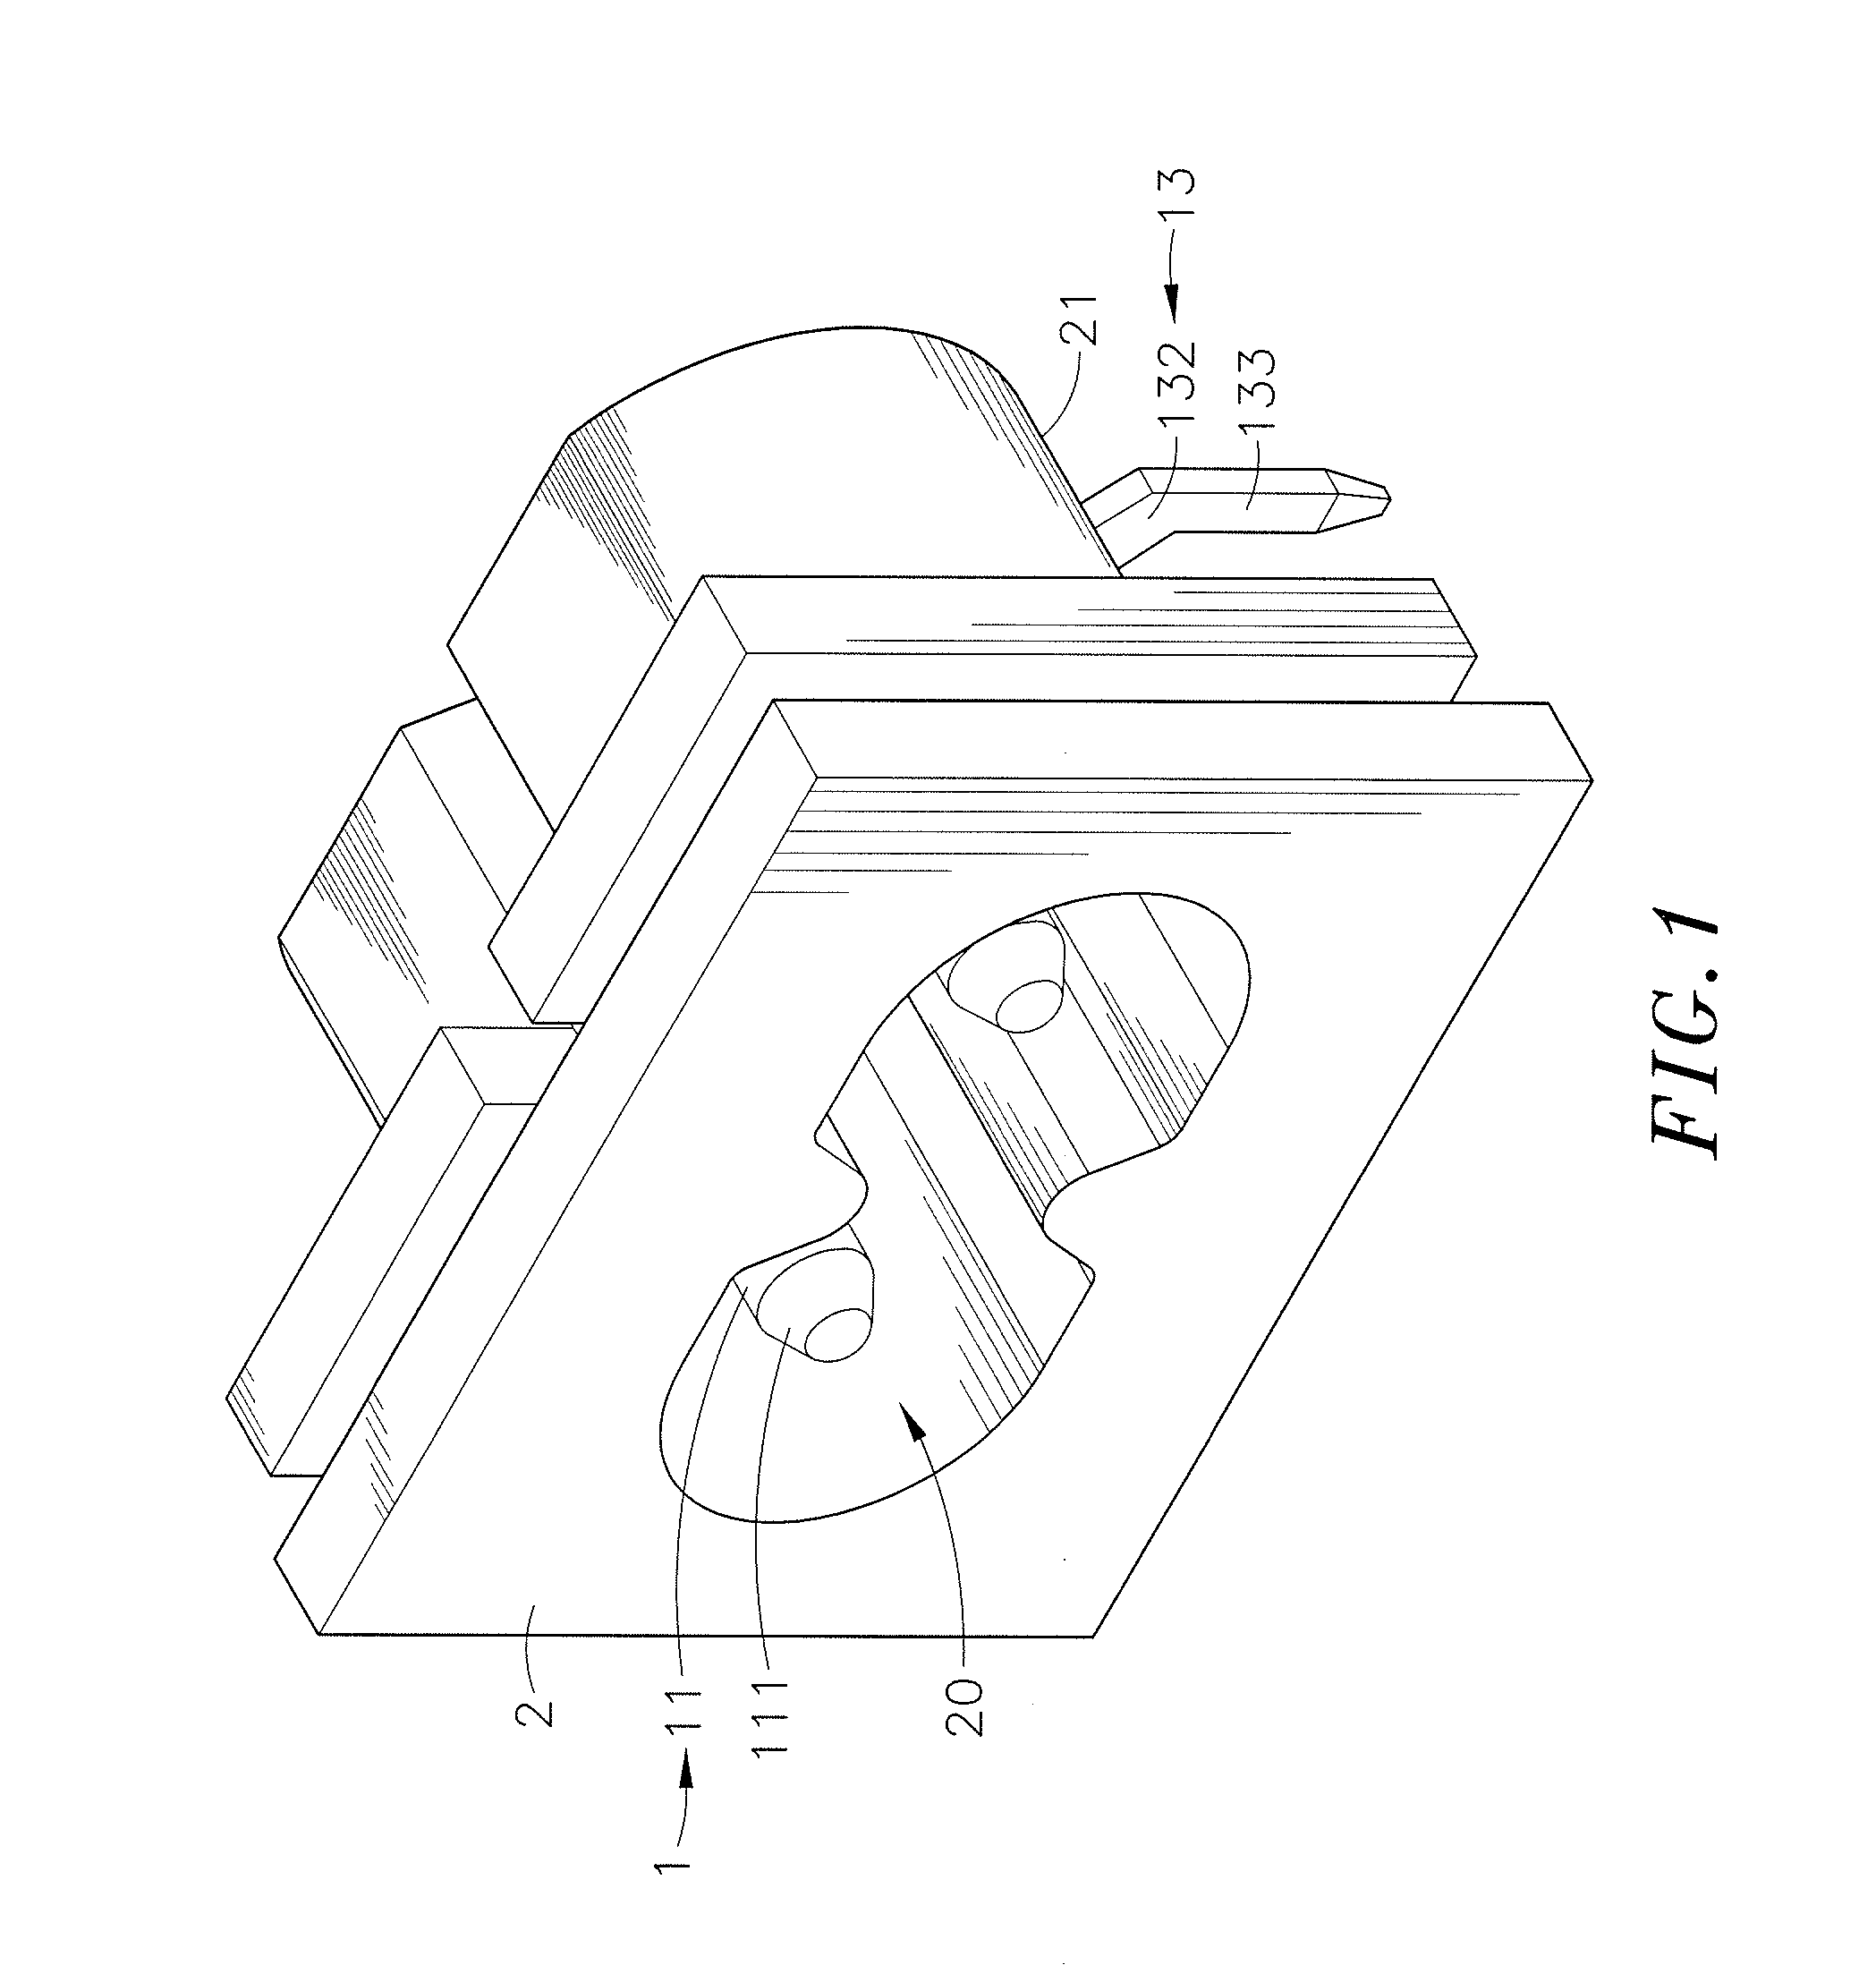 Electric connector having terminals with outwardly extending extension arms